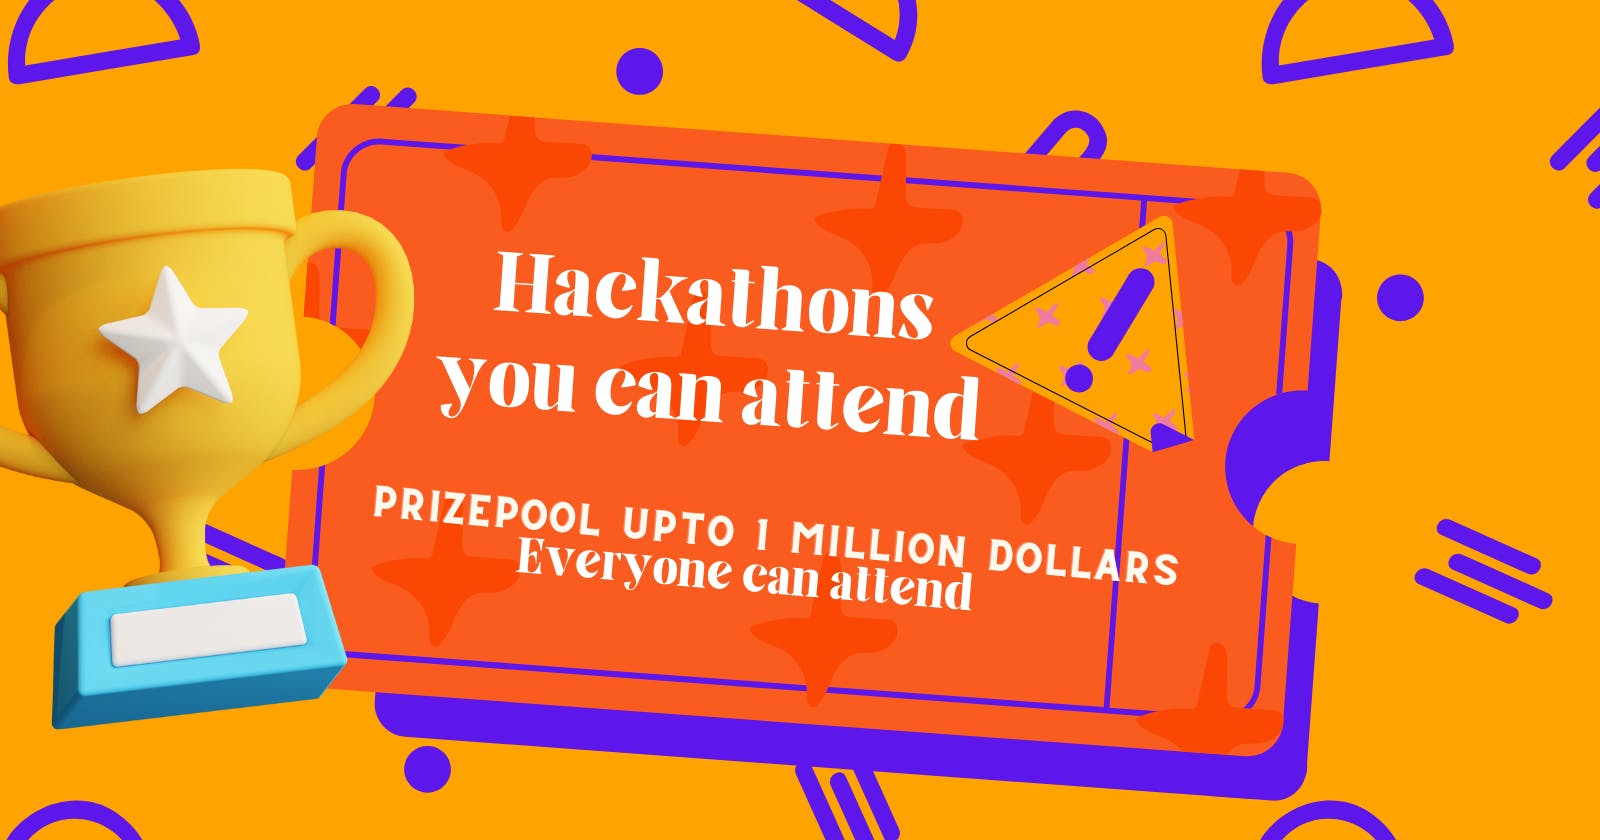 Some Big Hackathons that you can participate and win big prizes.